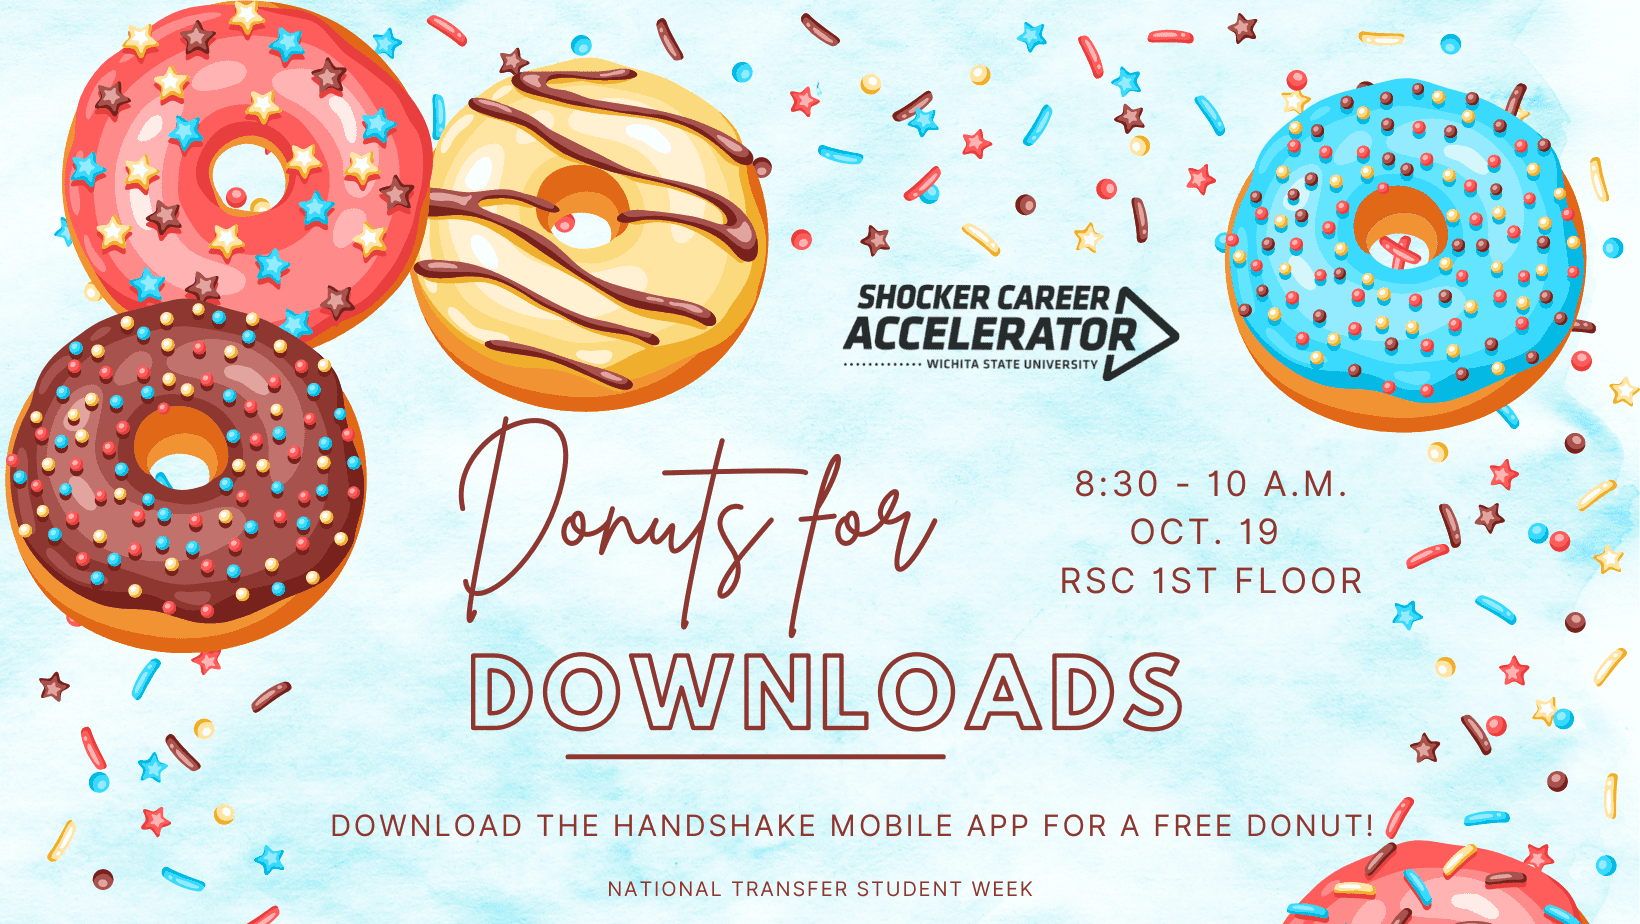 Shocker Career Accelerator logo. Blue background with colorful donuts and sprinkles framing the text. Donuts for Dowloads. 8:30 - 10 a.m., Oct 19, RSC 1st Floor. Download the Handshake mobile app for a free donut! National Transfer Student Week